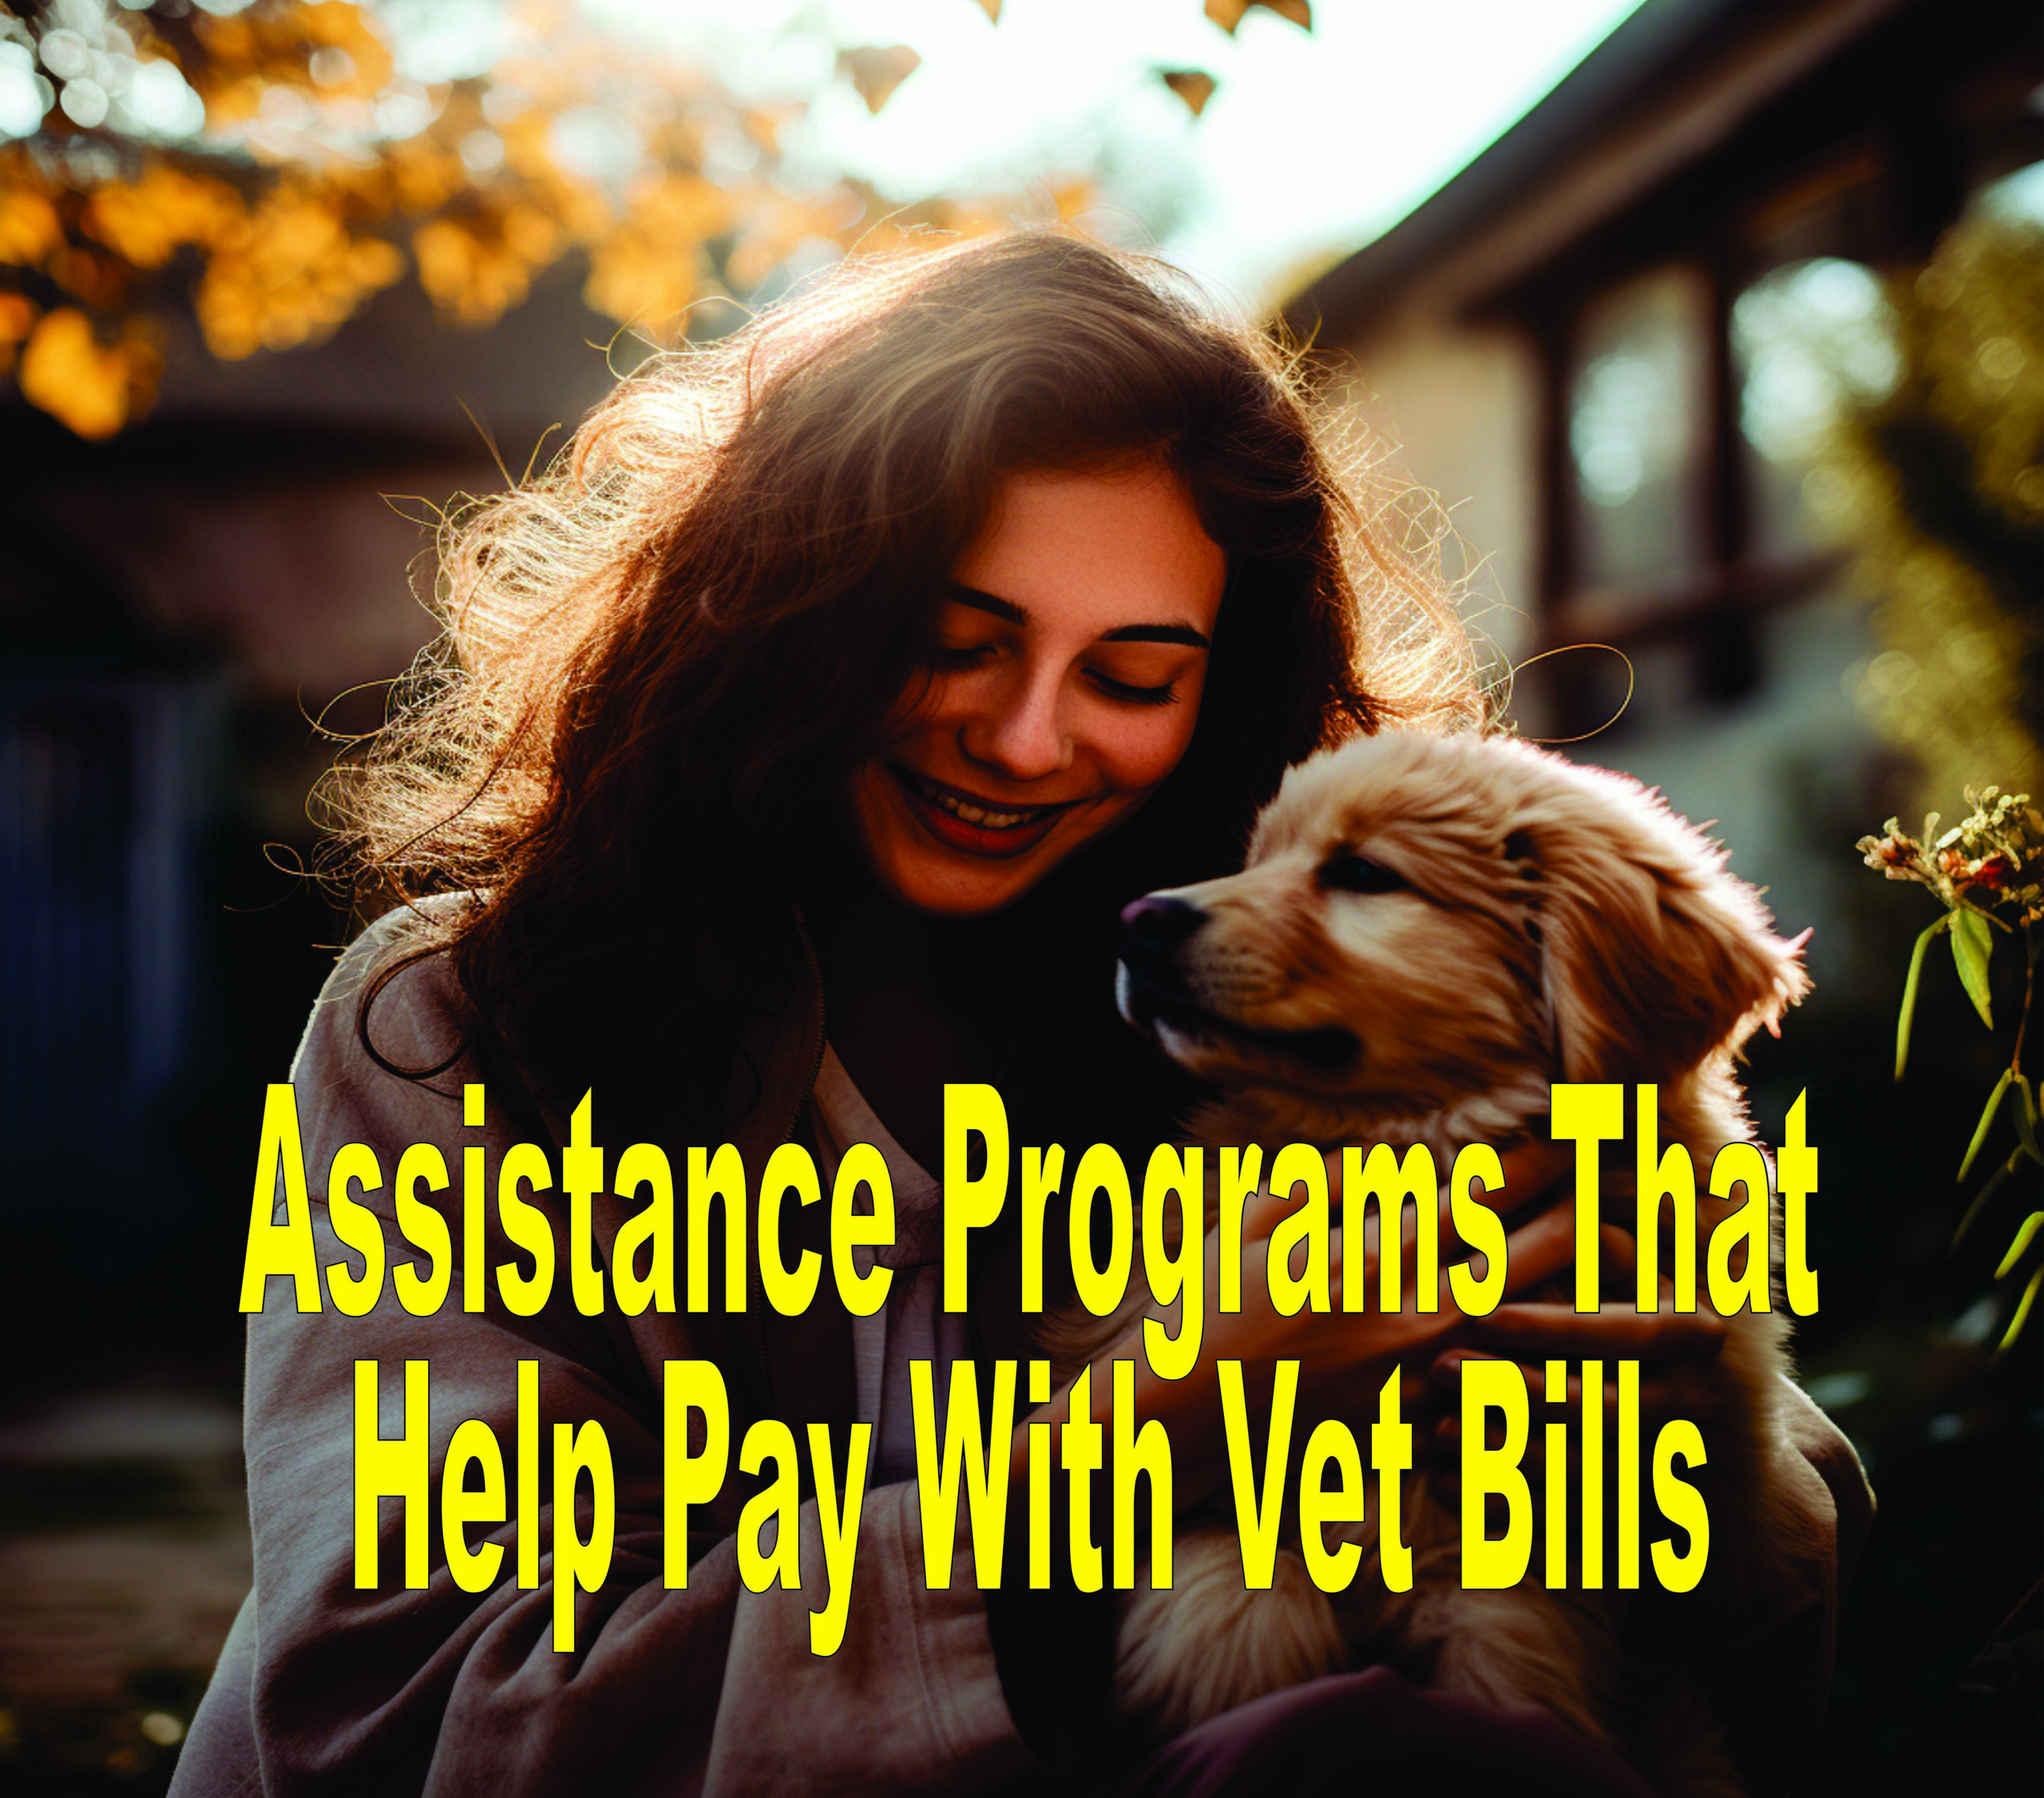 Assistance Programs That Help Pay With Vet Bills